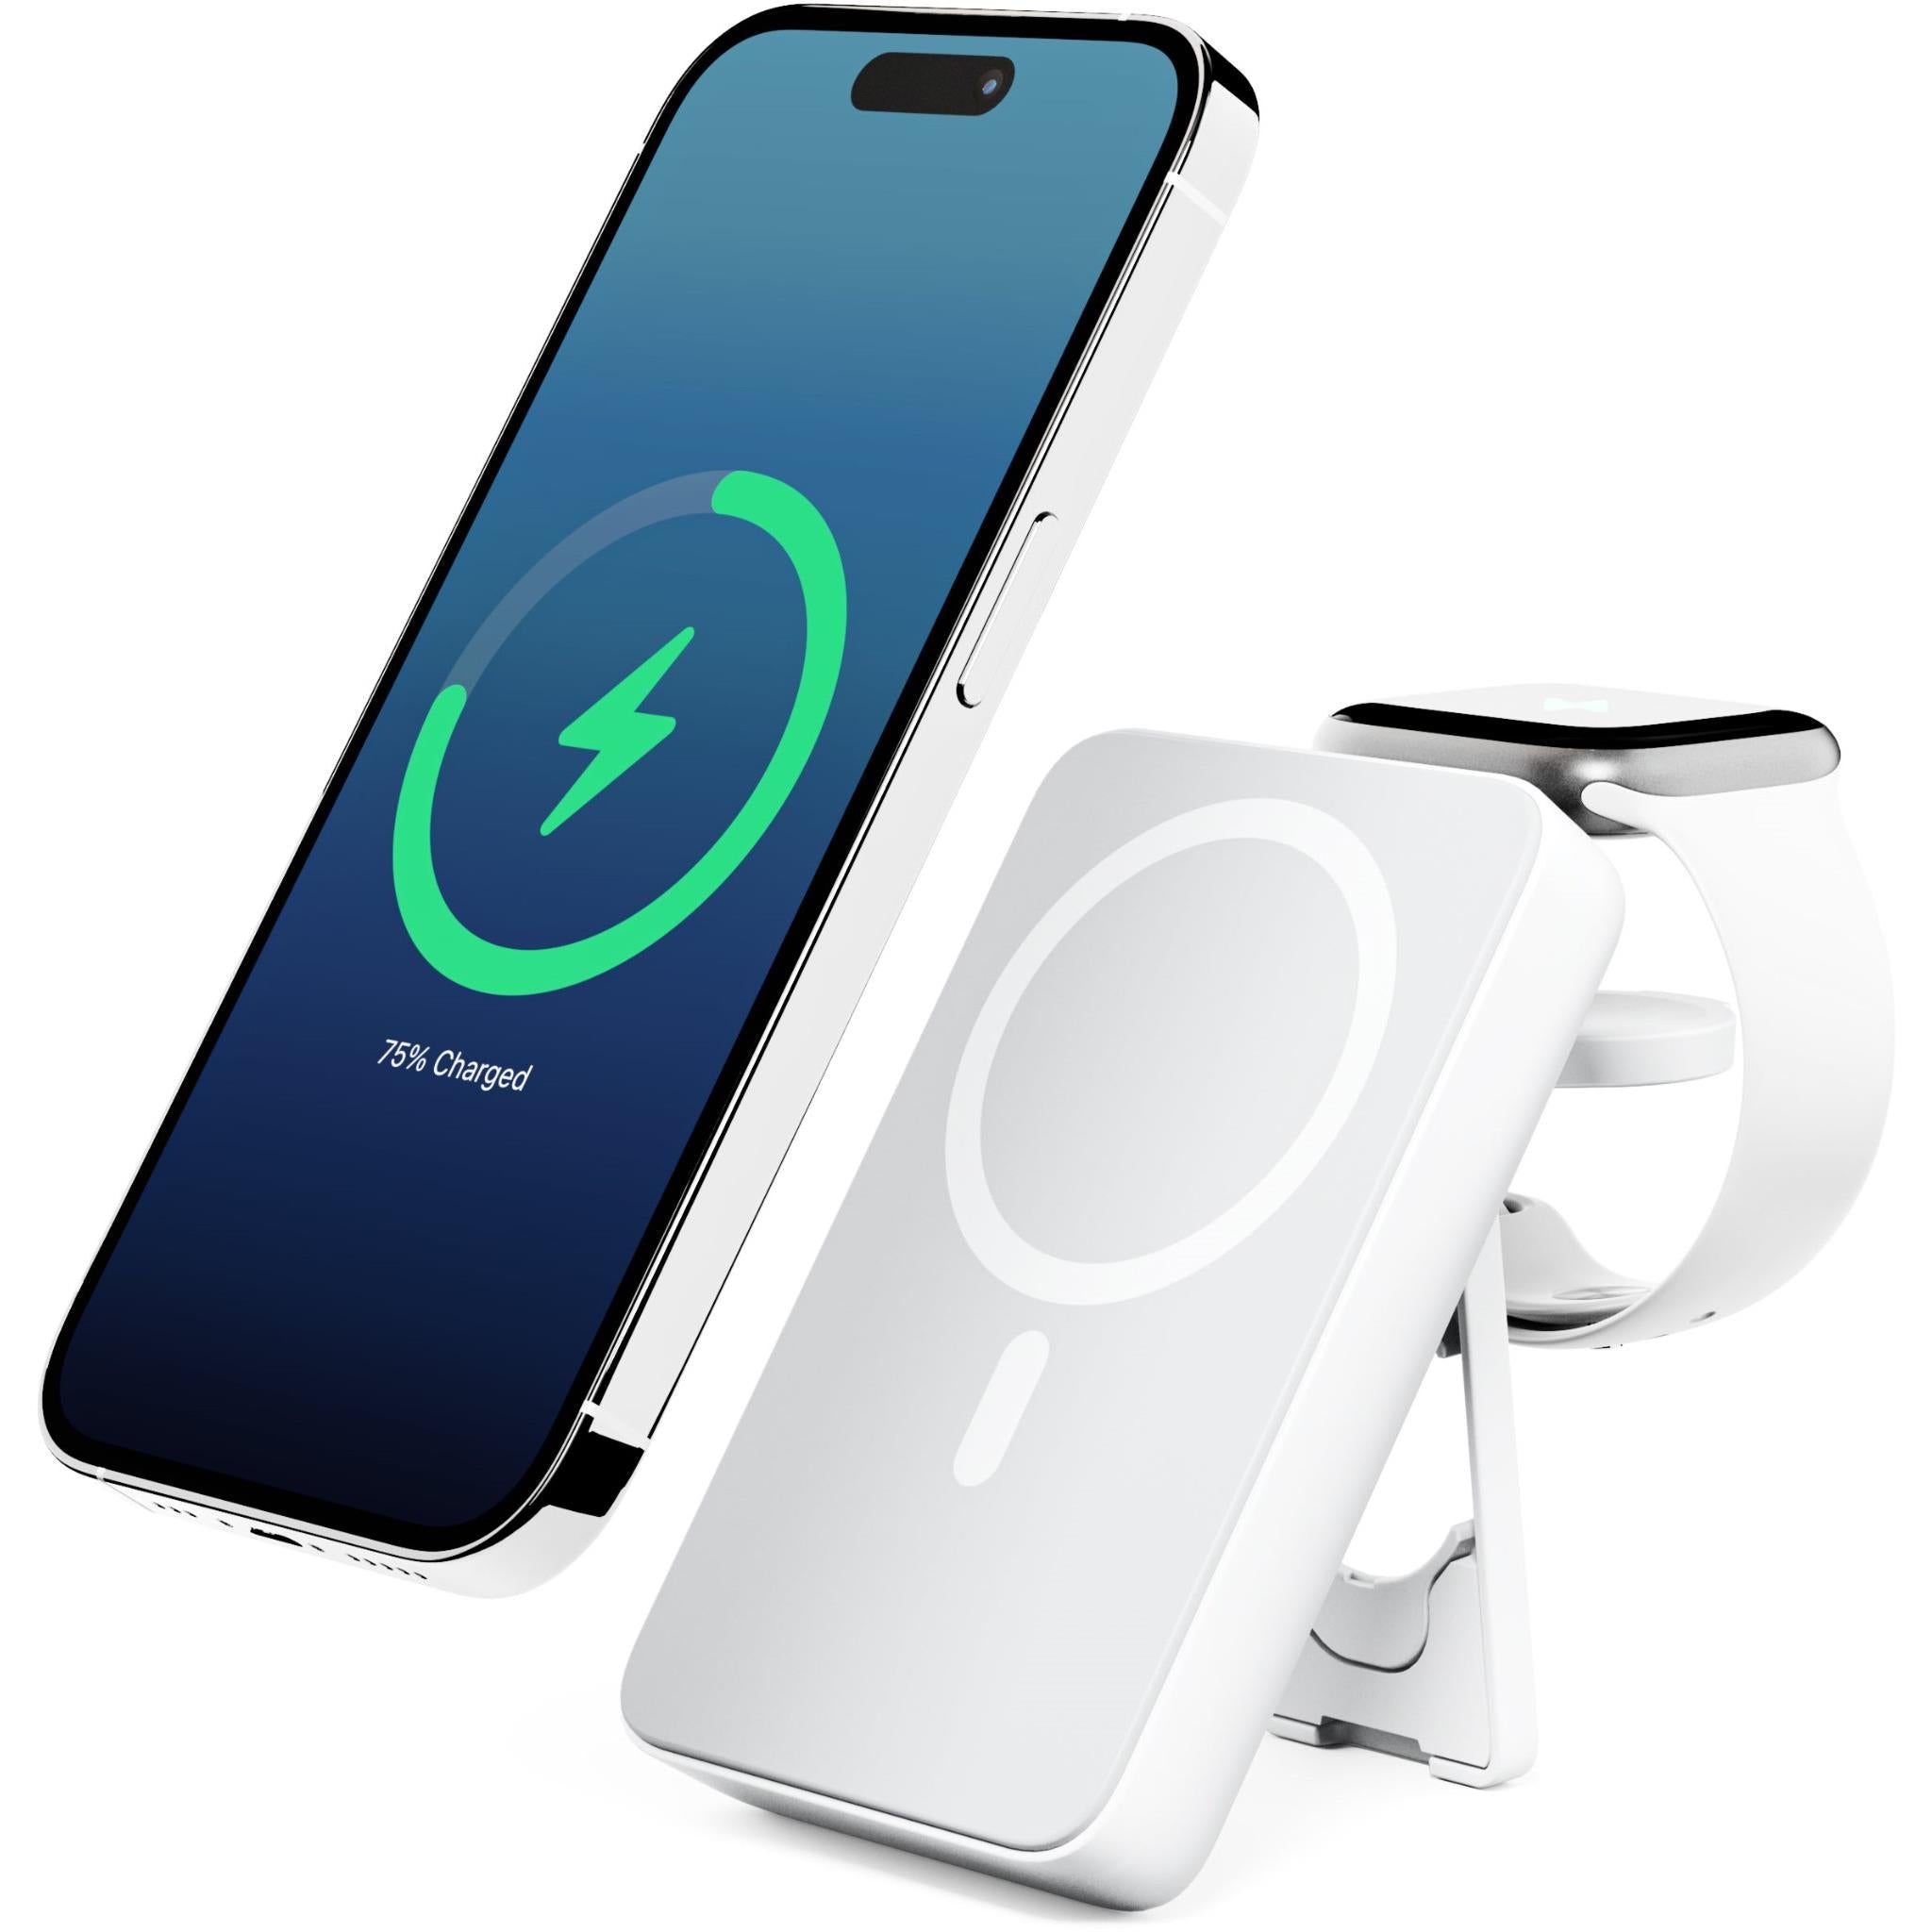 Fast Wireless Charger for Apple Watch + Power Bank 10K